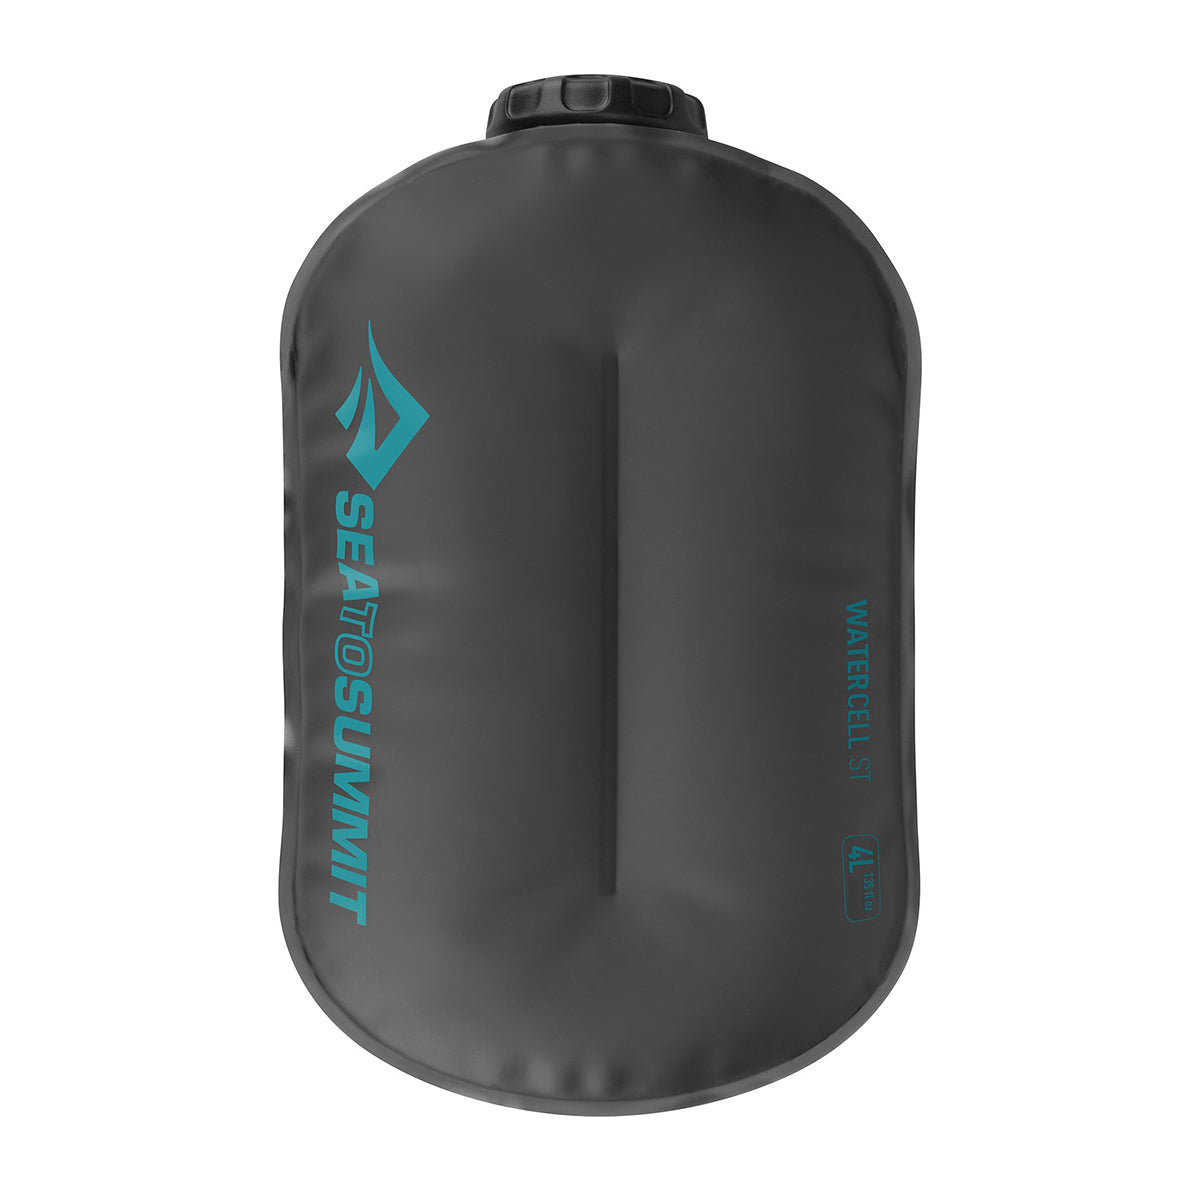 Sea to Summit Watercell ST in Sea to Summit Watercell ST by Sea to Summit | Camping - goHUNT Shop by GOHUNT | Sea to Summit - GOHUNT Shop